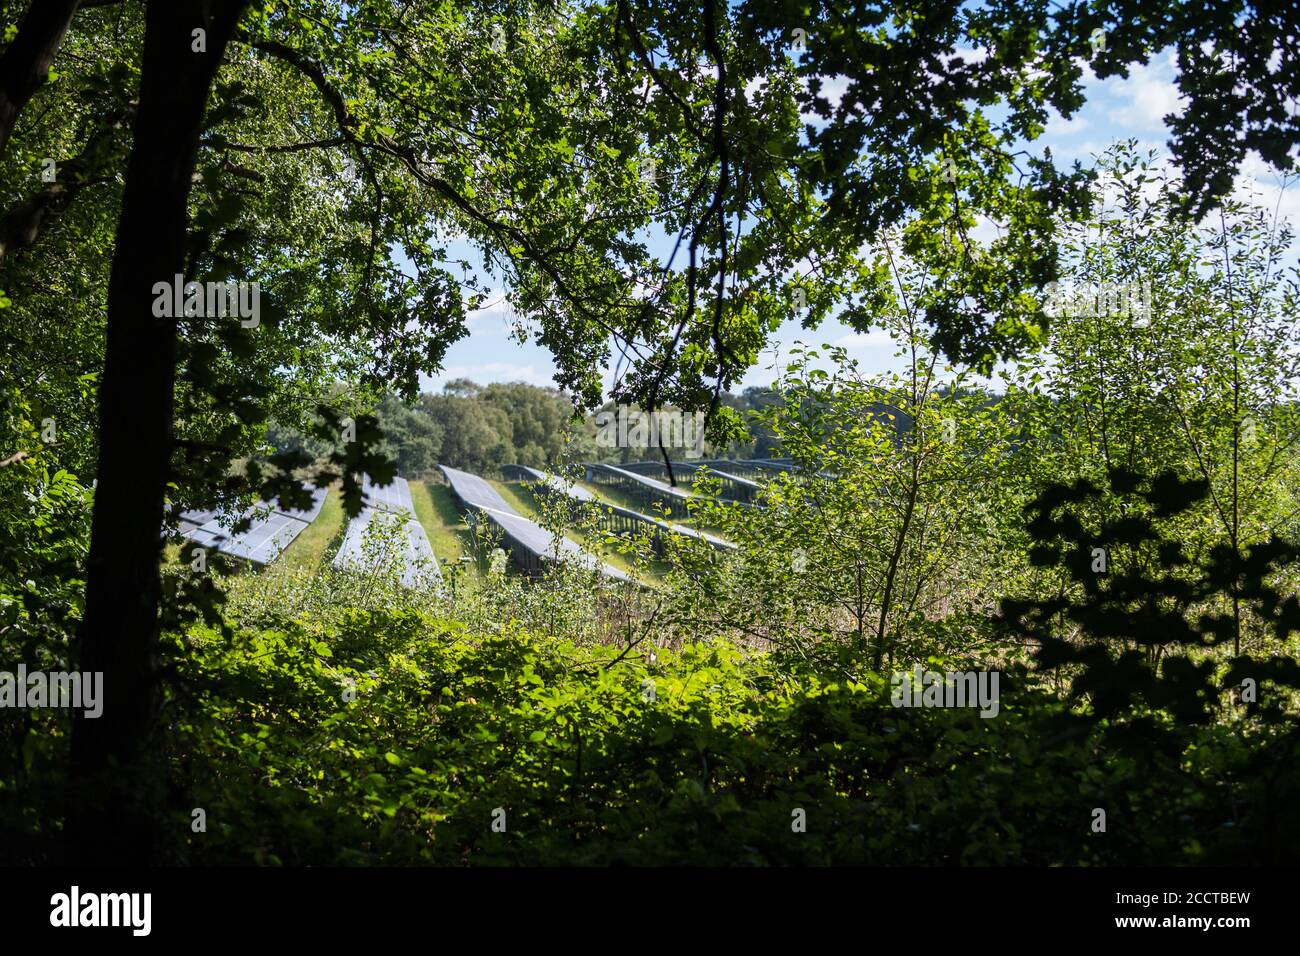 P.V. solar panels at a solar farm on the Welbeck Estate, Meden Vale, Nottinghamshire in a woodland. Stock Photo